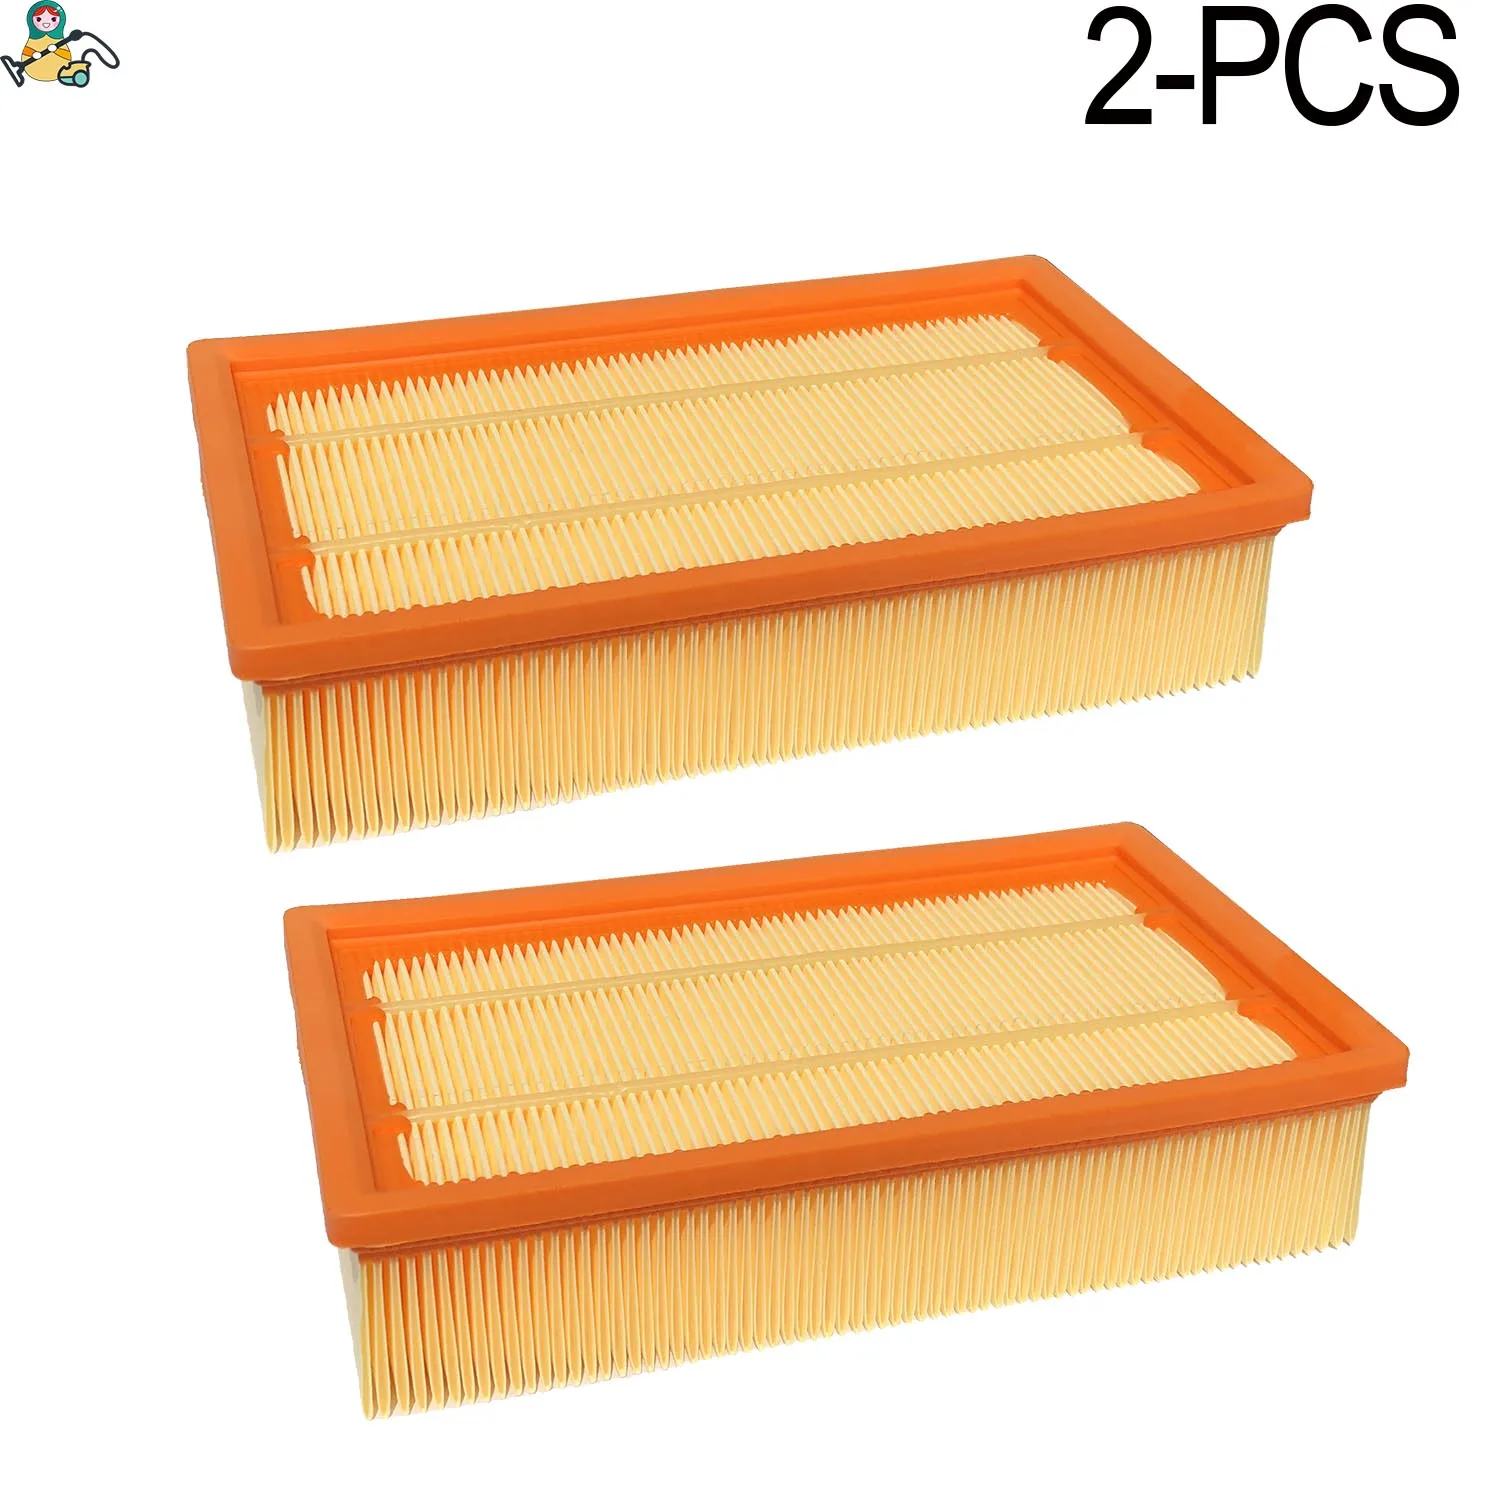 Filter for Karcher vacuum cleaner filter KM 70/30 NT 20/1 NT 30/1 Ap NT 35/1 NT 361 ECO NT 40/1 Ap NT 50/1 NT 561 NT 611 Eco